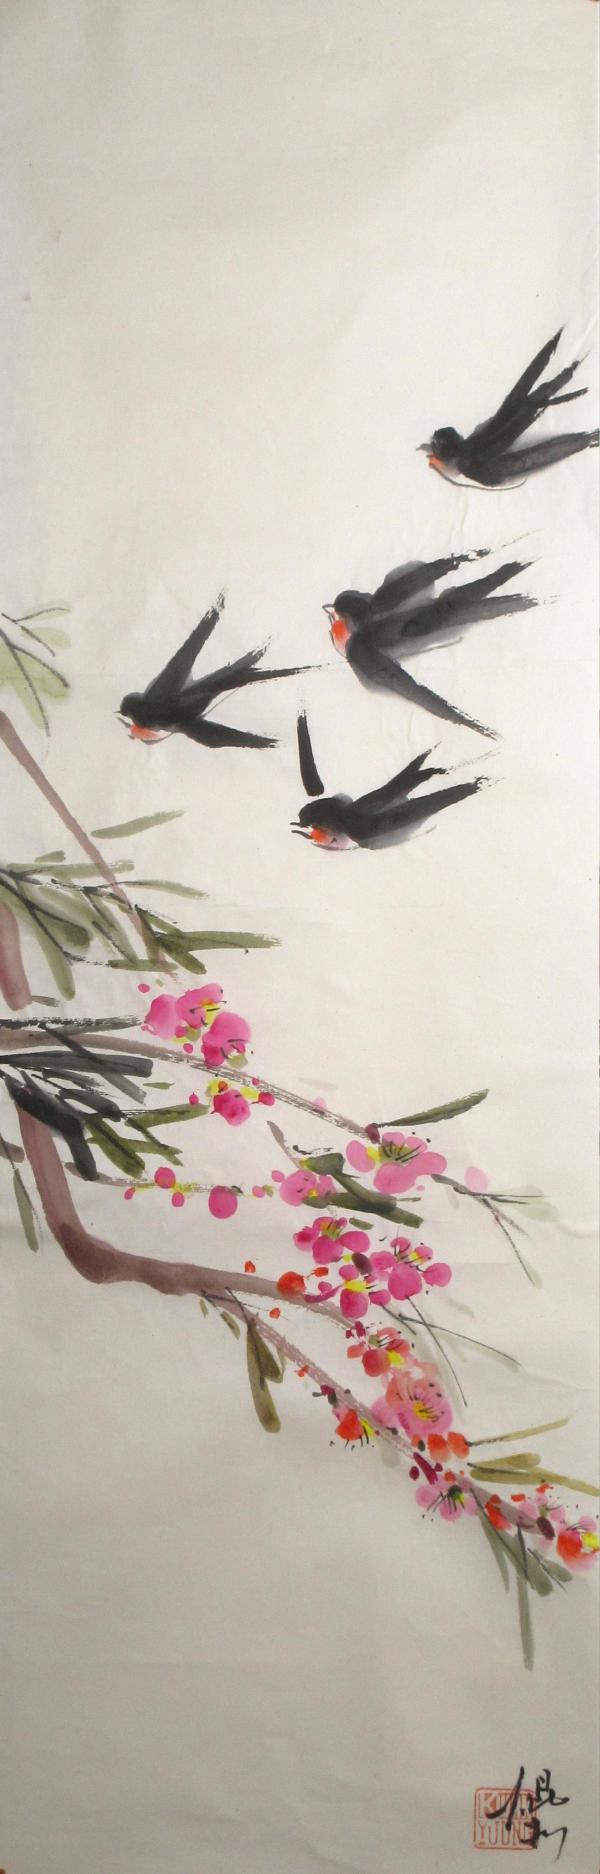 Swallows and Plum Blossoms by Kwan Y. Jung